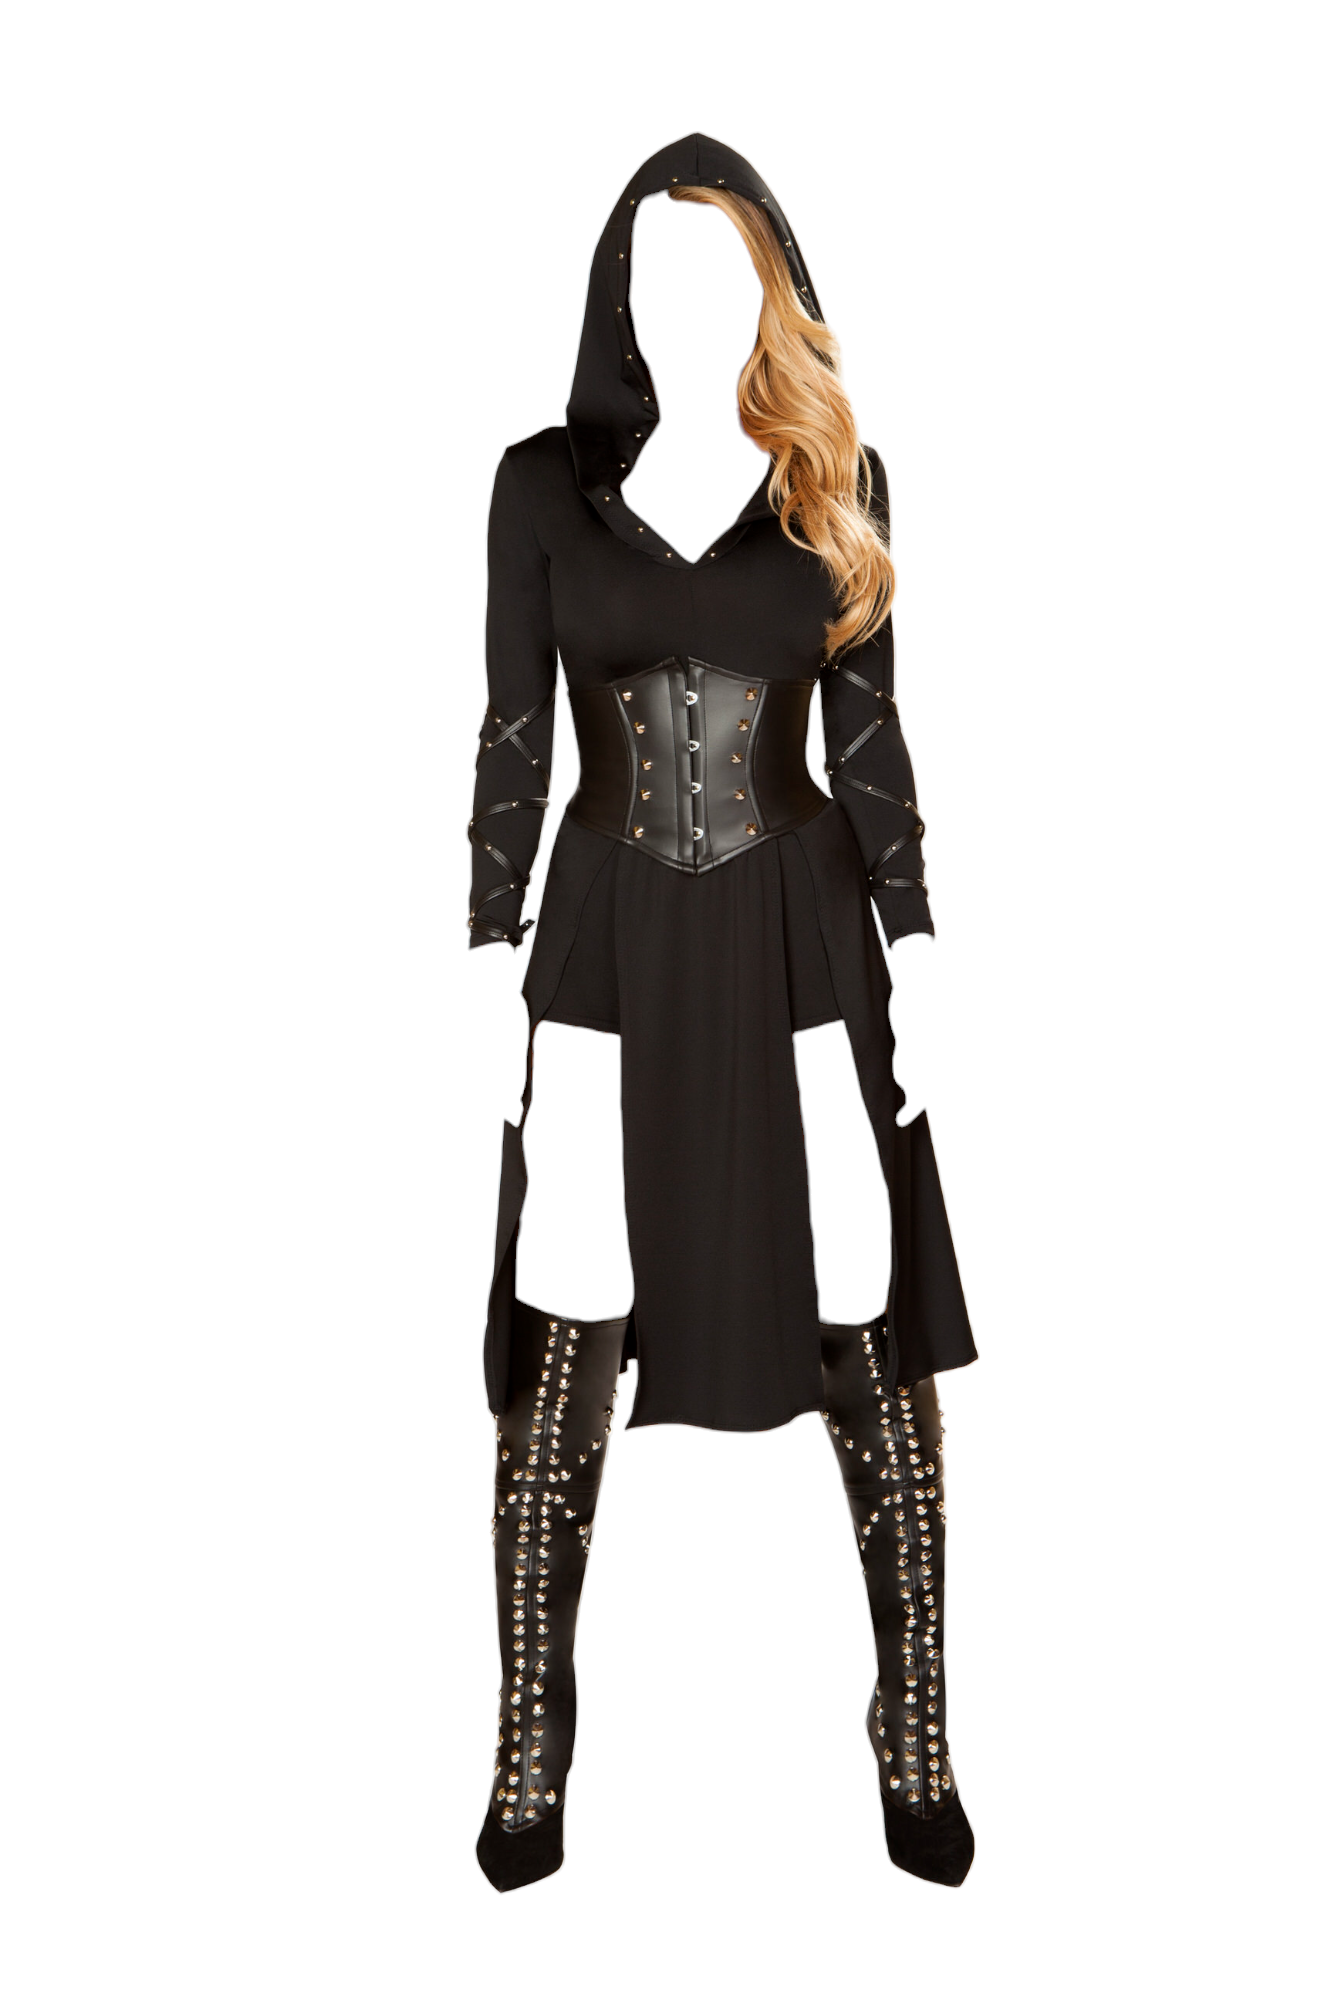 Roma Costume 3 PC The Queens Assassin Hooded Dress with Shorts Black